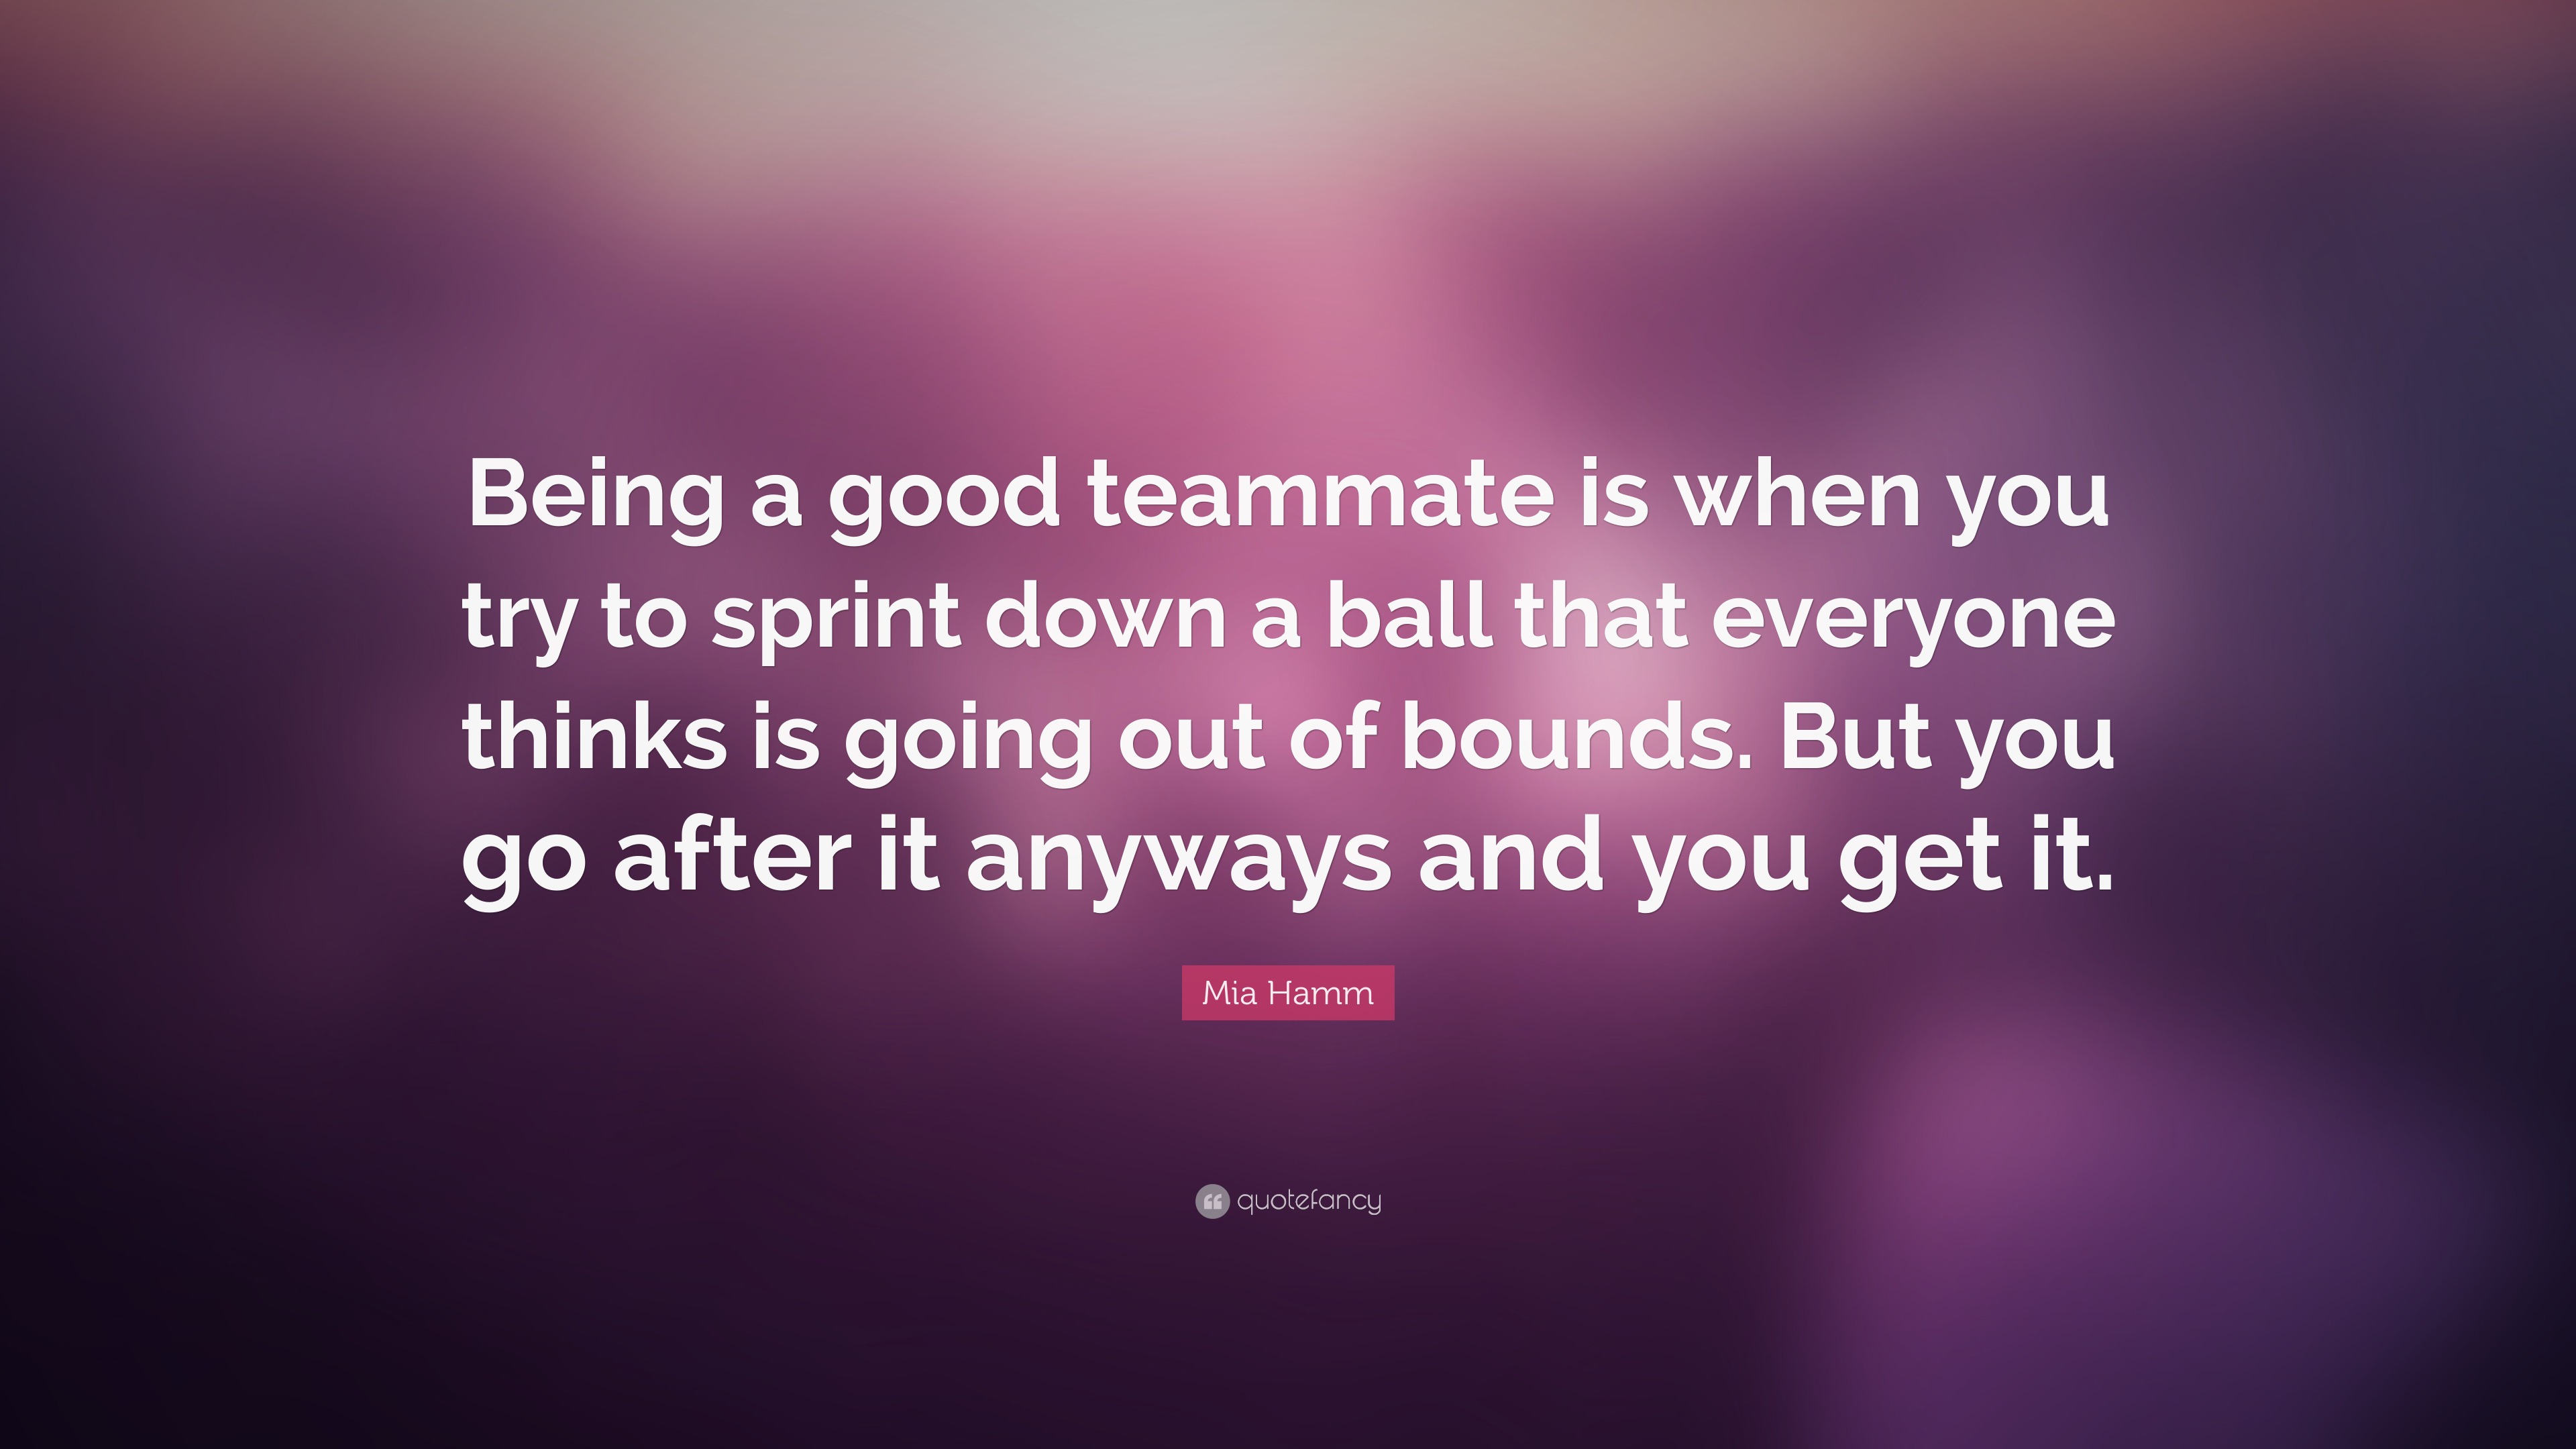 Mia Hamm Quote: “Being a good teammate is when you try to sprint down a ...